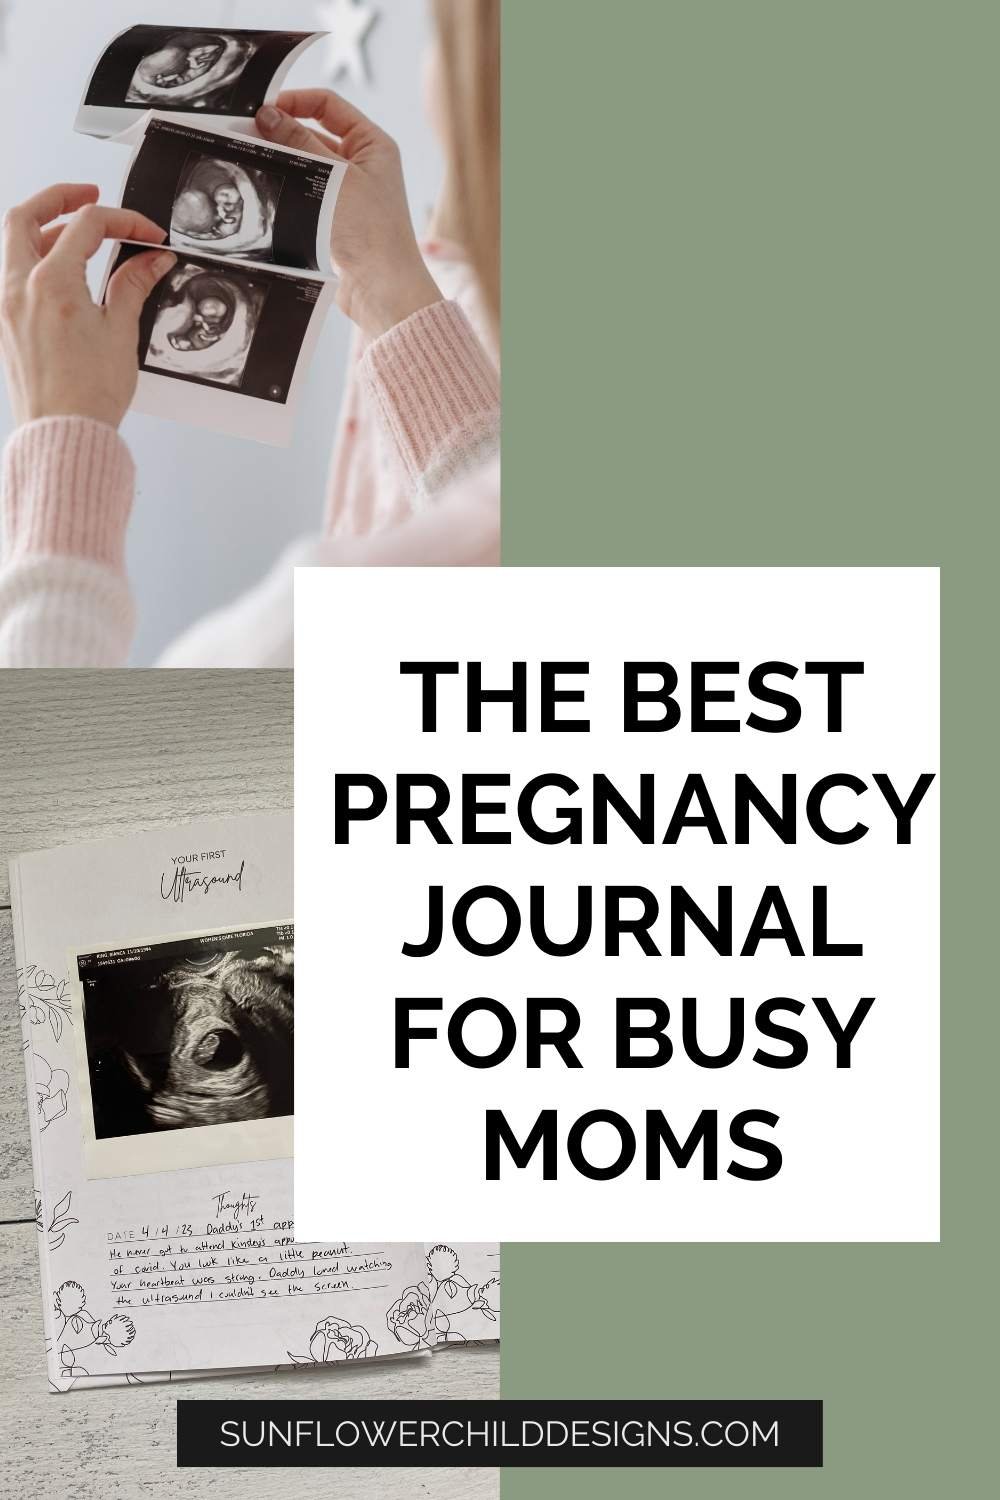 Is Simplicity The Key to Best Pregnancy Journals?